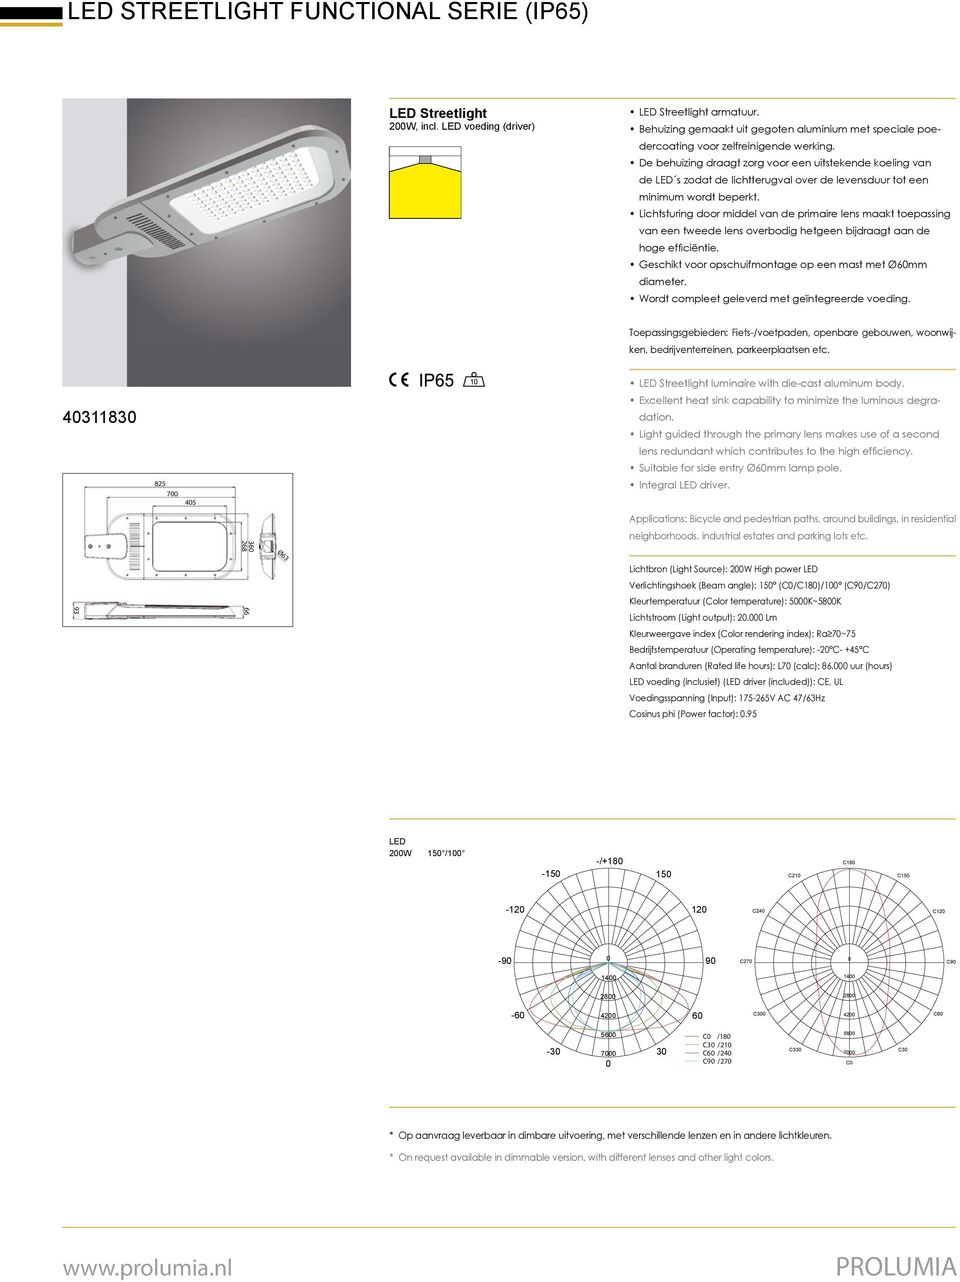 Suitable for side entry Ø6mm lamp pole. Integral driver.